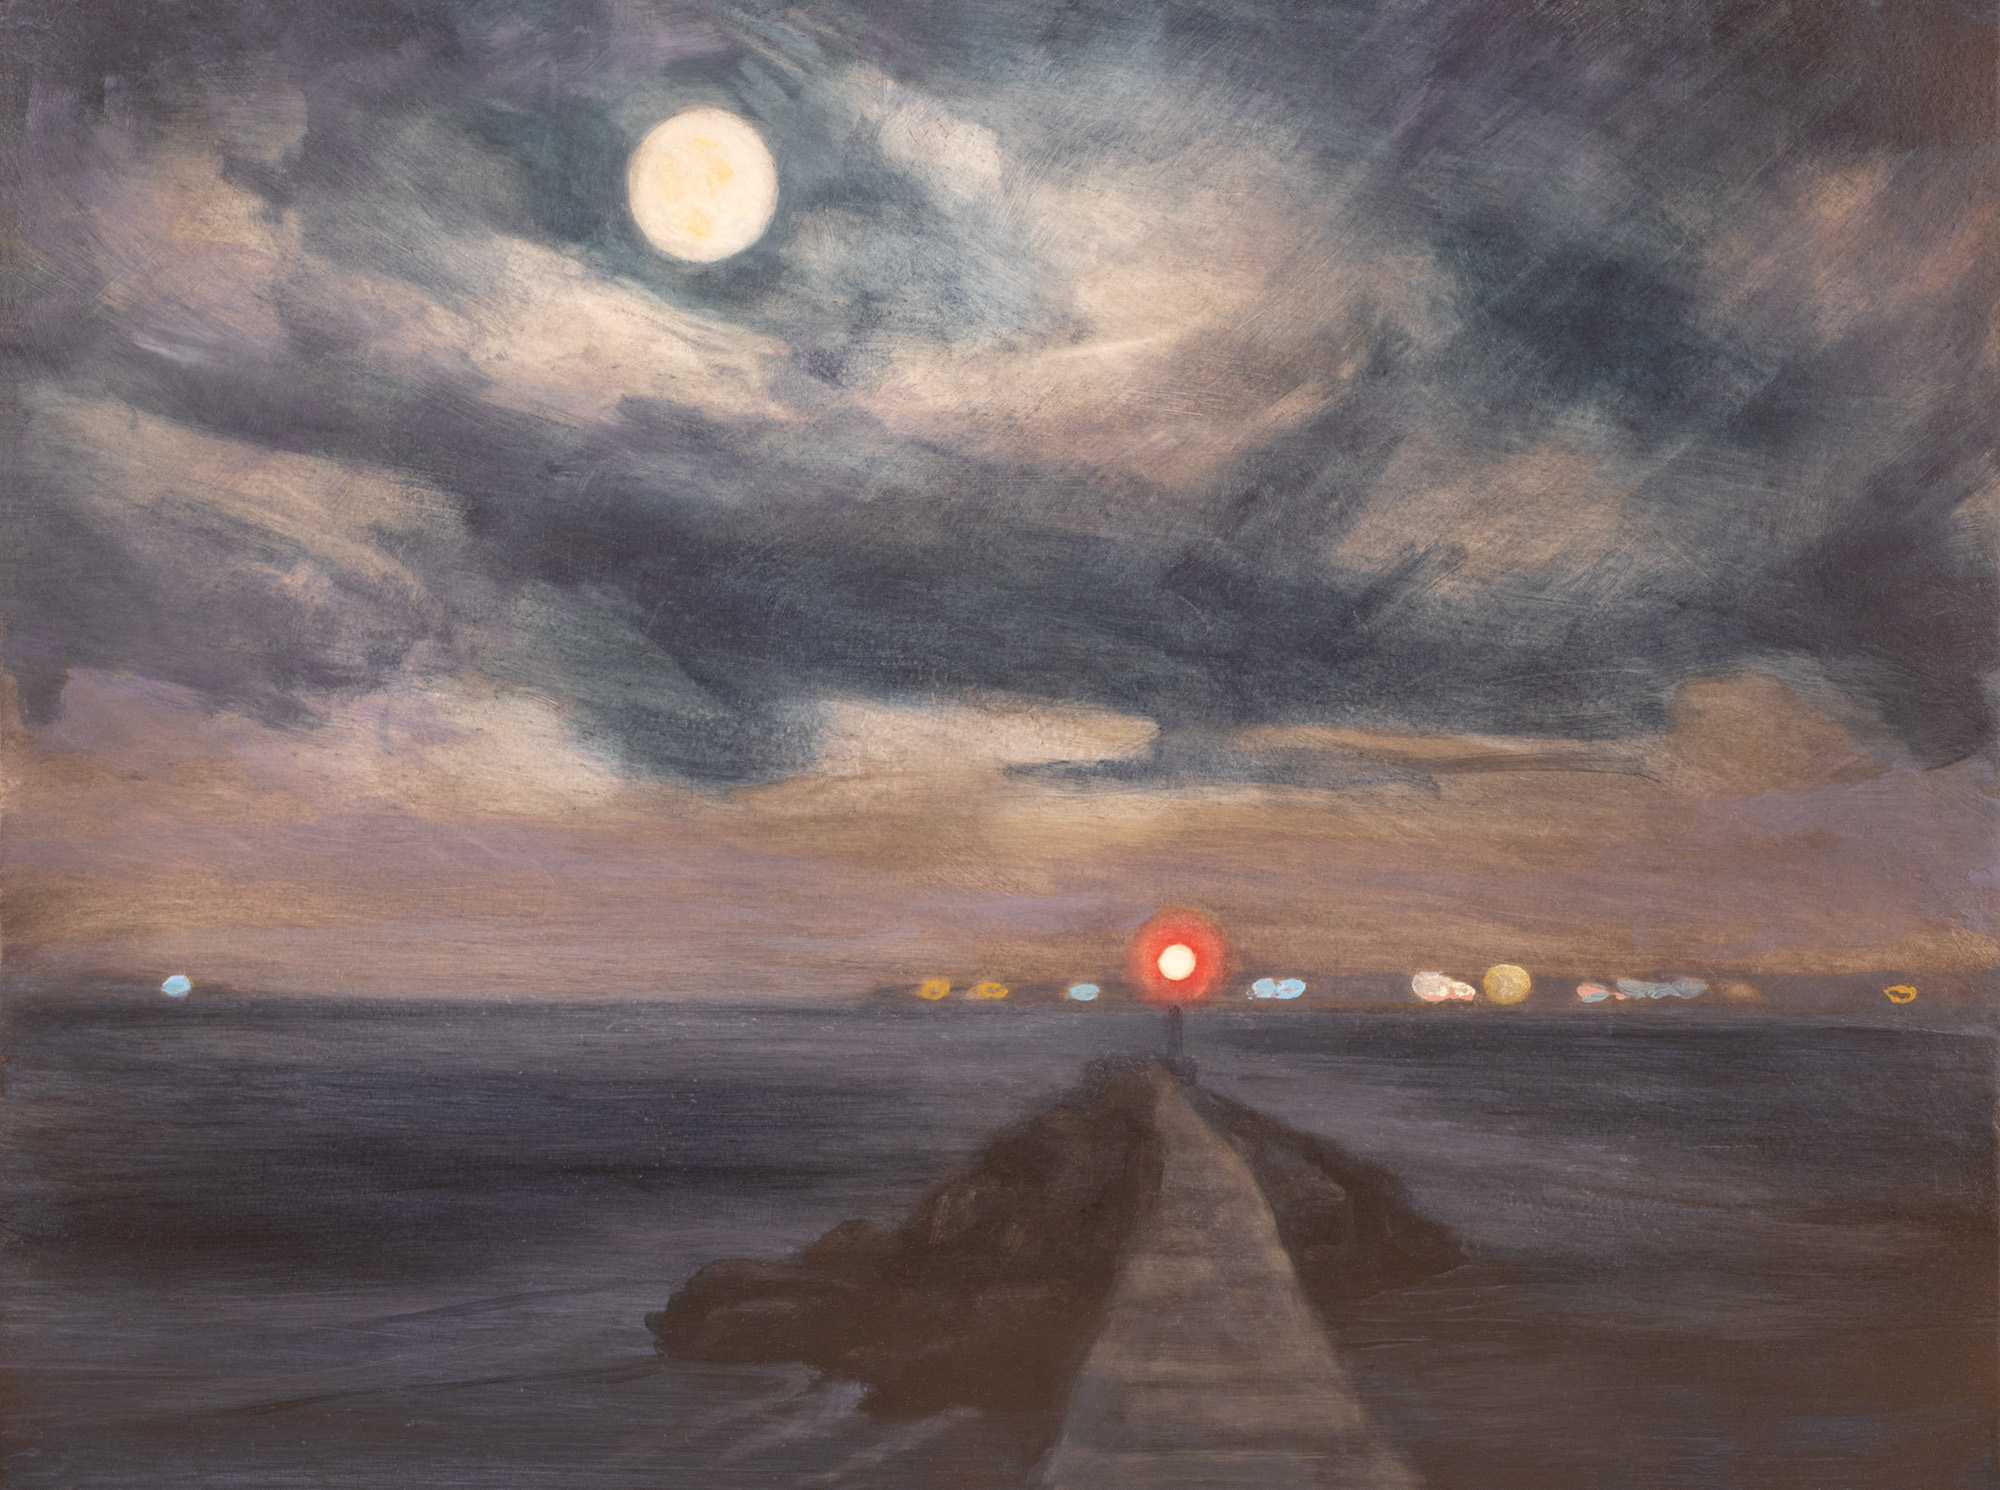 Full Moon and Distant Lights, oil on panel, 12 x 16 in., $550.00